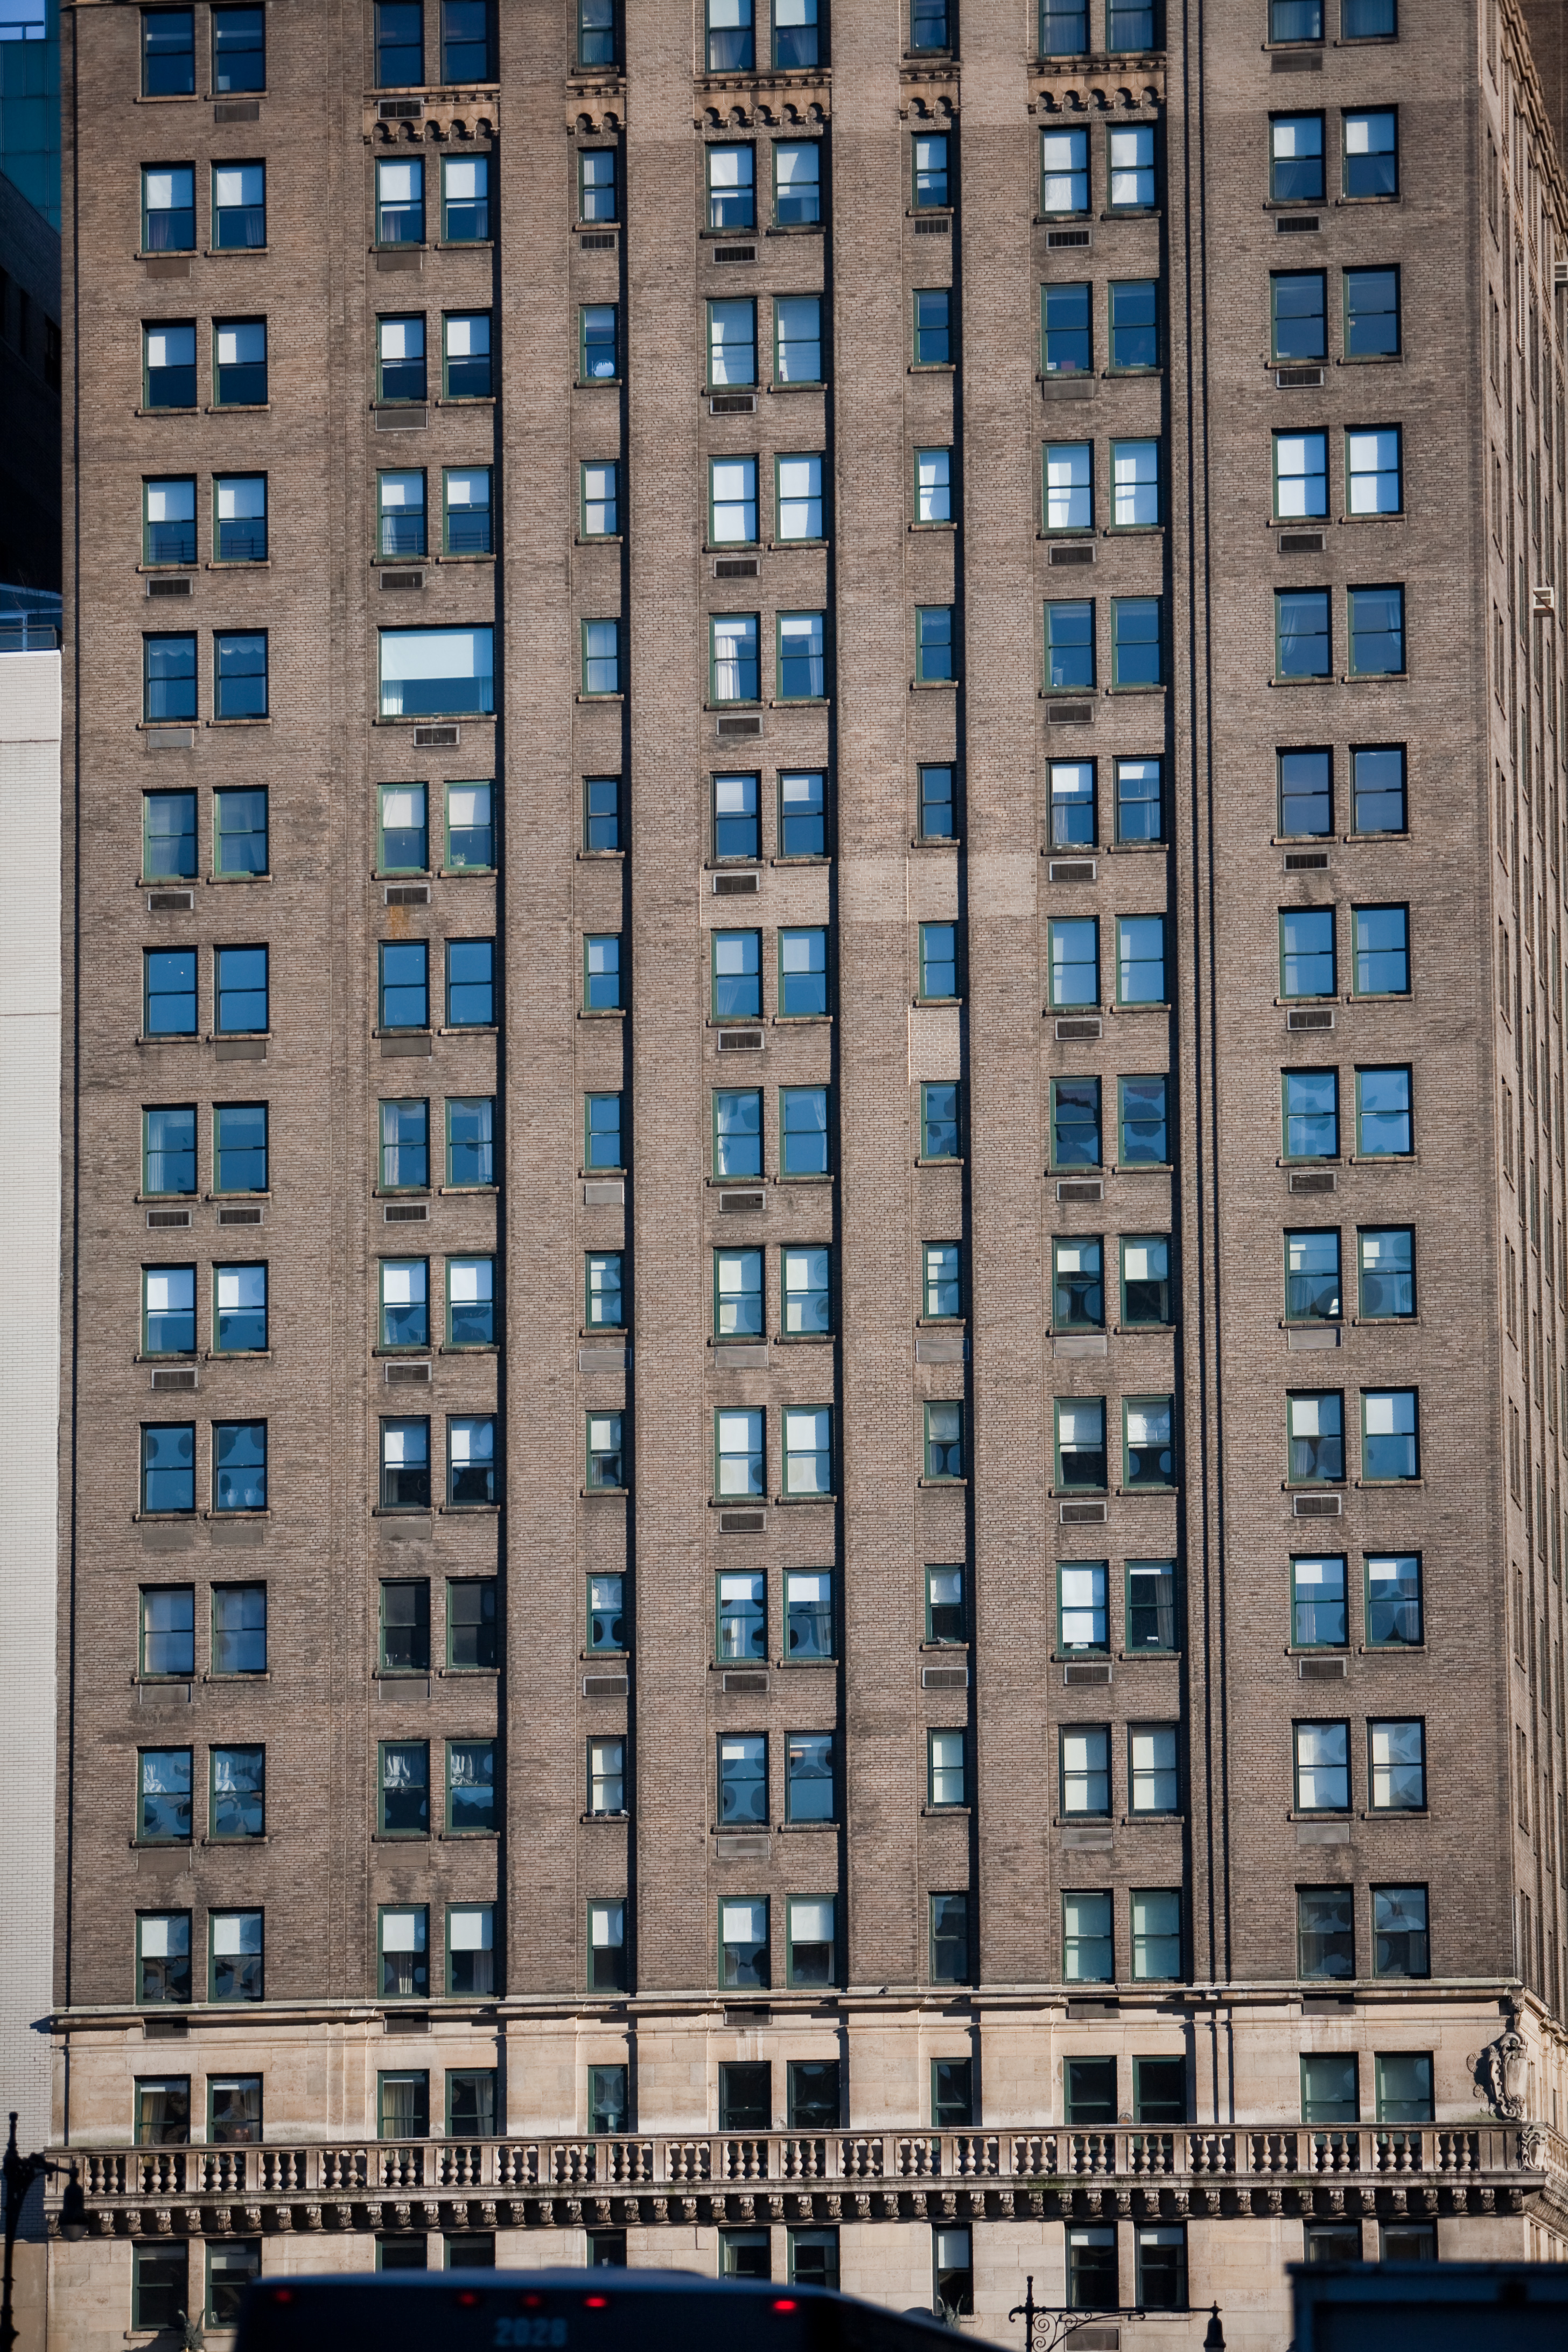 New York city textures | photo page - everystockphoto